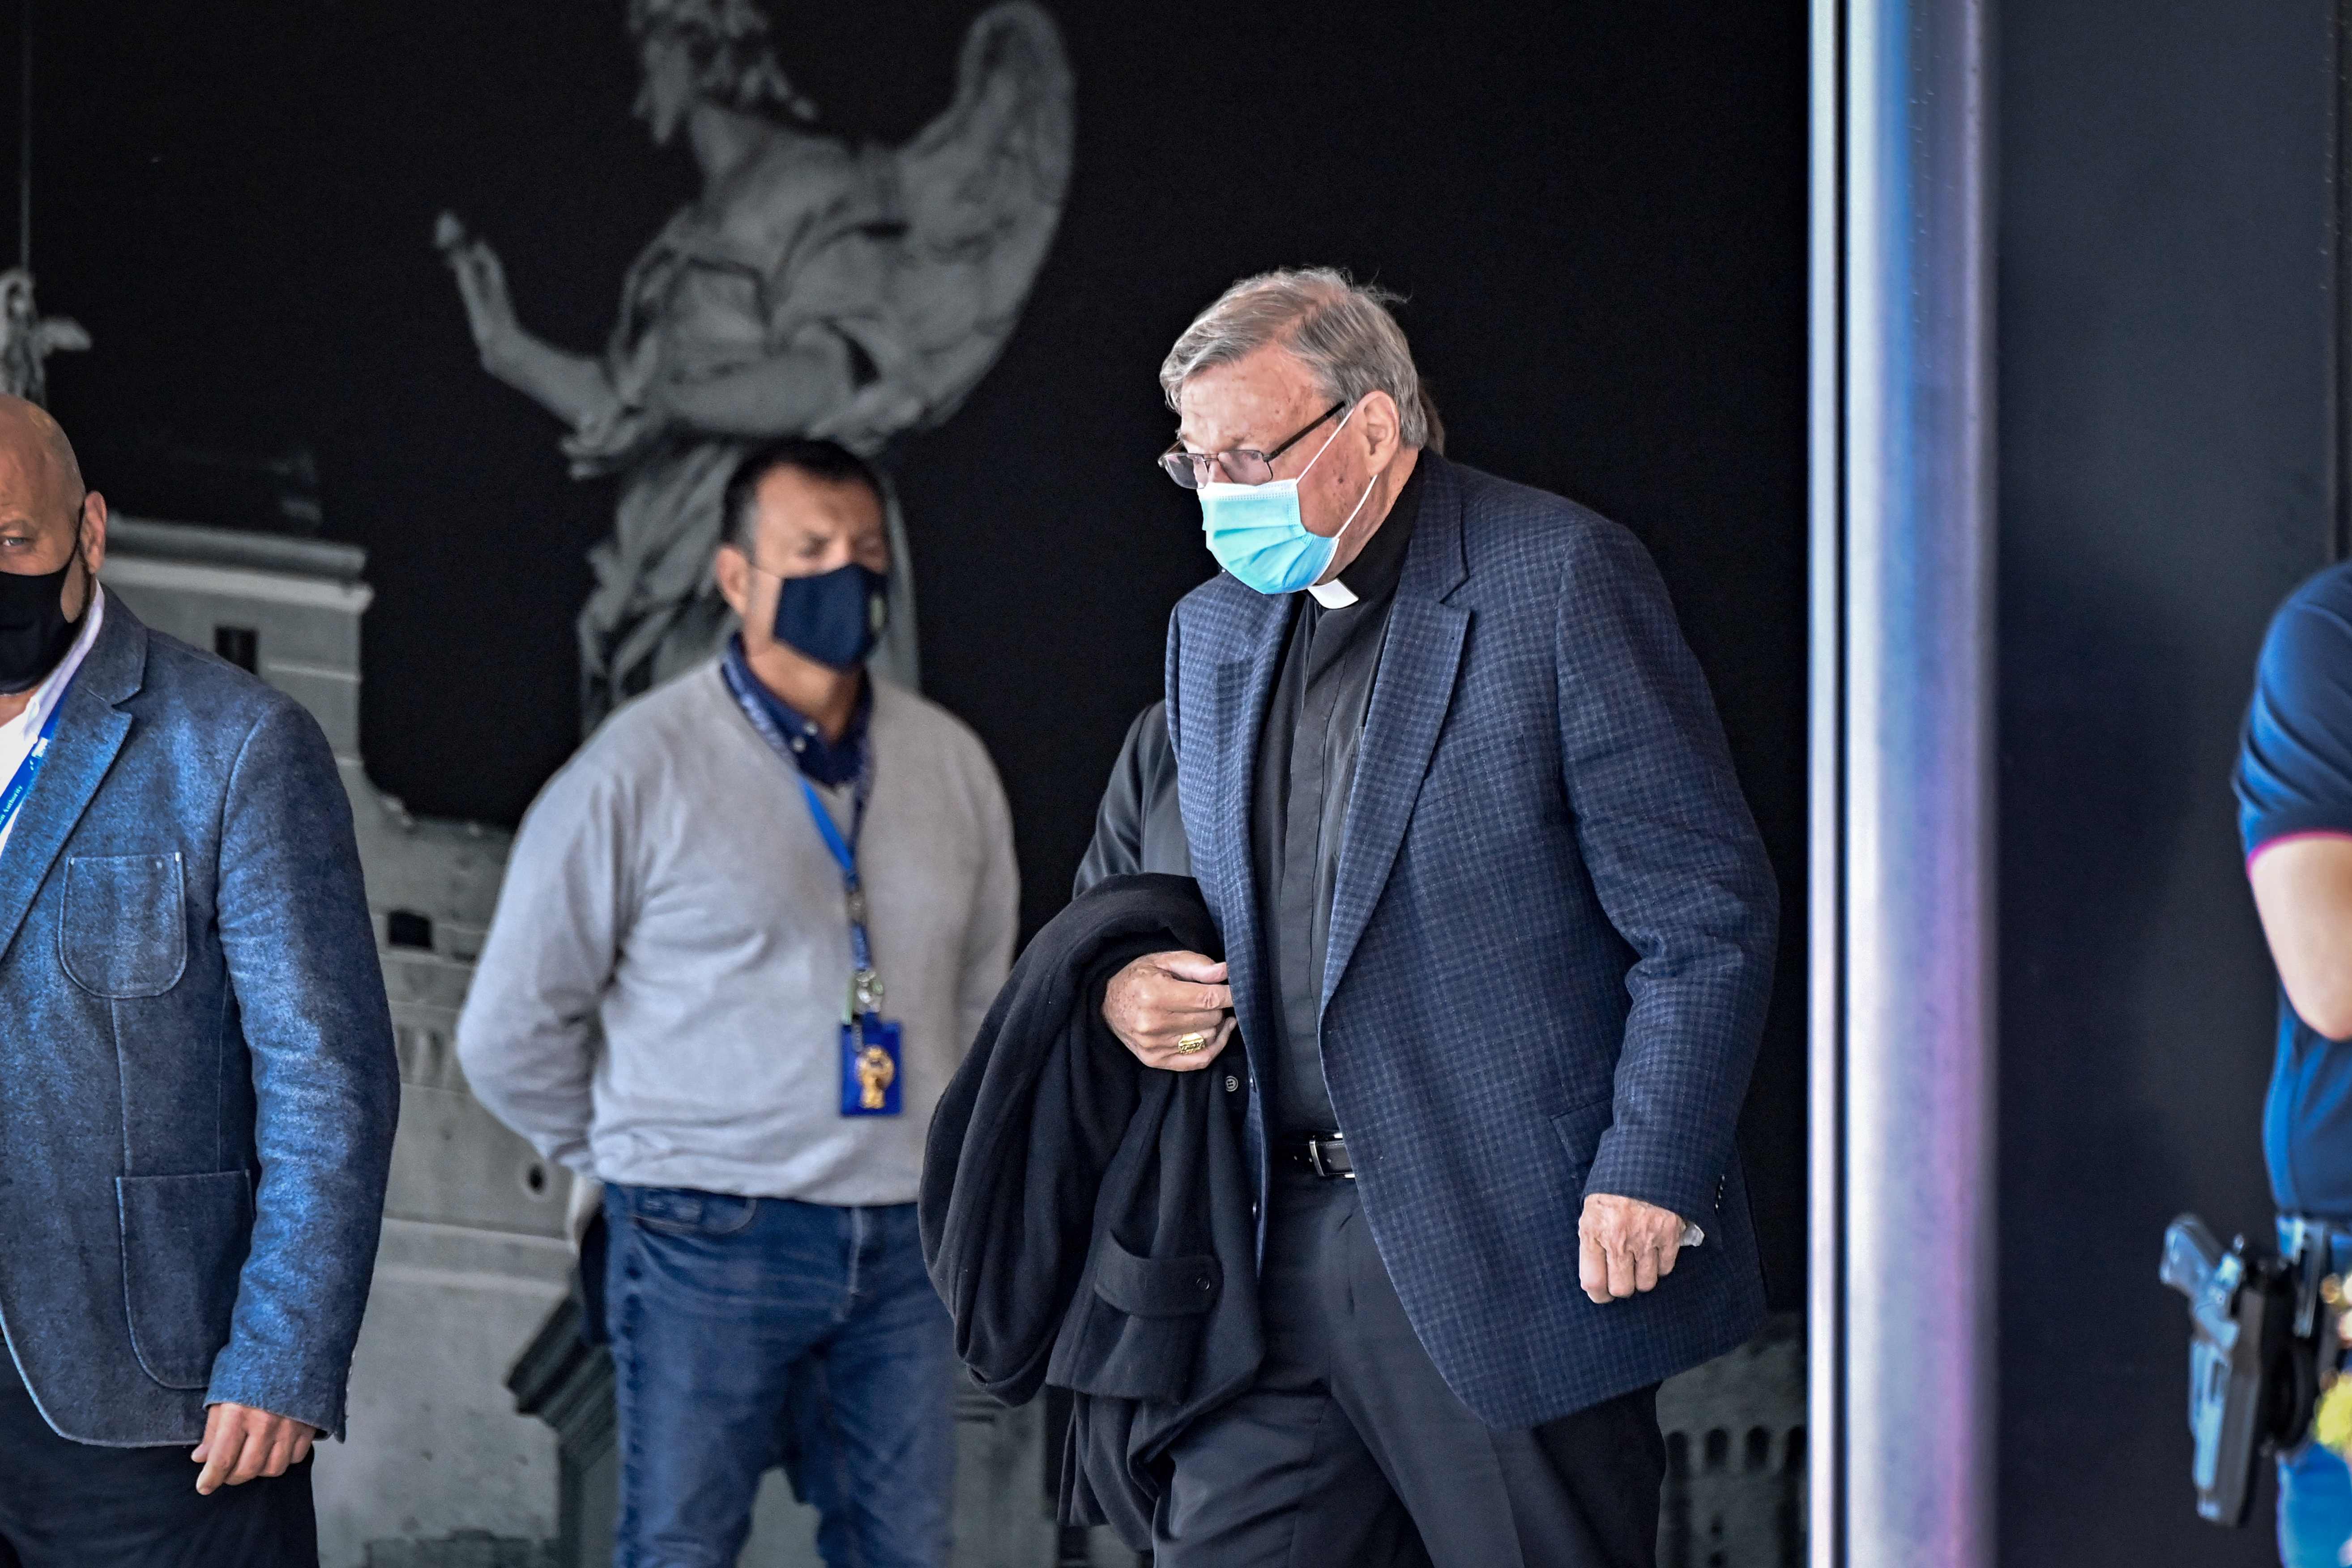 Australian Cardinal George Pell (C-R) prepares to get into a car after landing at Rome's Fiumicino airport on September 30, 2020, returning for the first time since being acquitted of sexual abuse charges. - Pell arrived from Sydney to Rome on September 30, 2020 on a "private visit", just six months after Australia's High Court quashed his conviction on charges of molesting two choirboys in the 1990s.&nbsp;